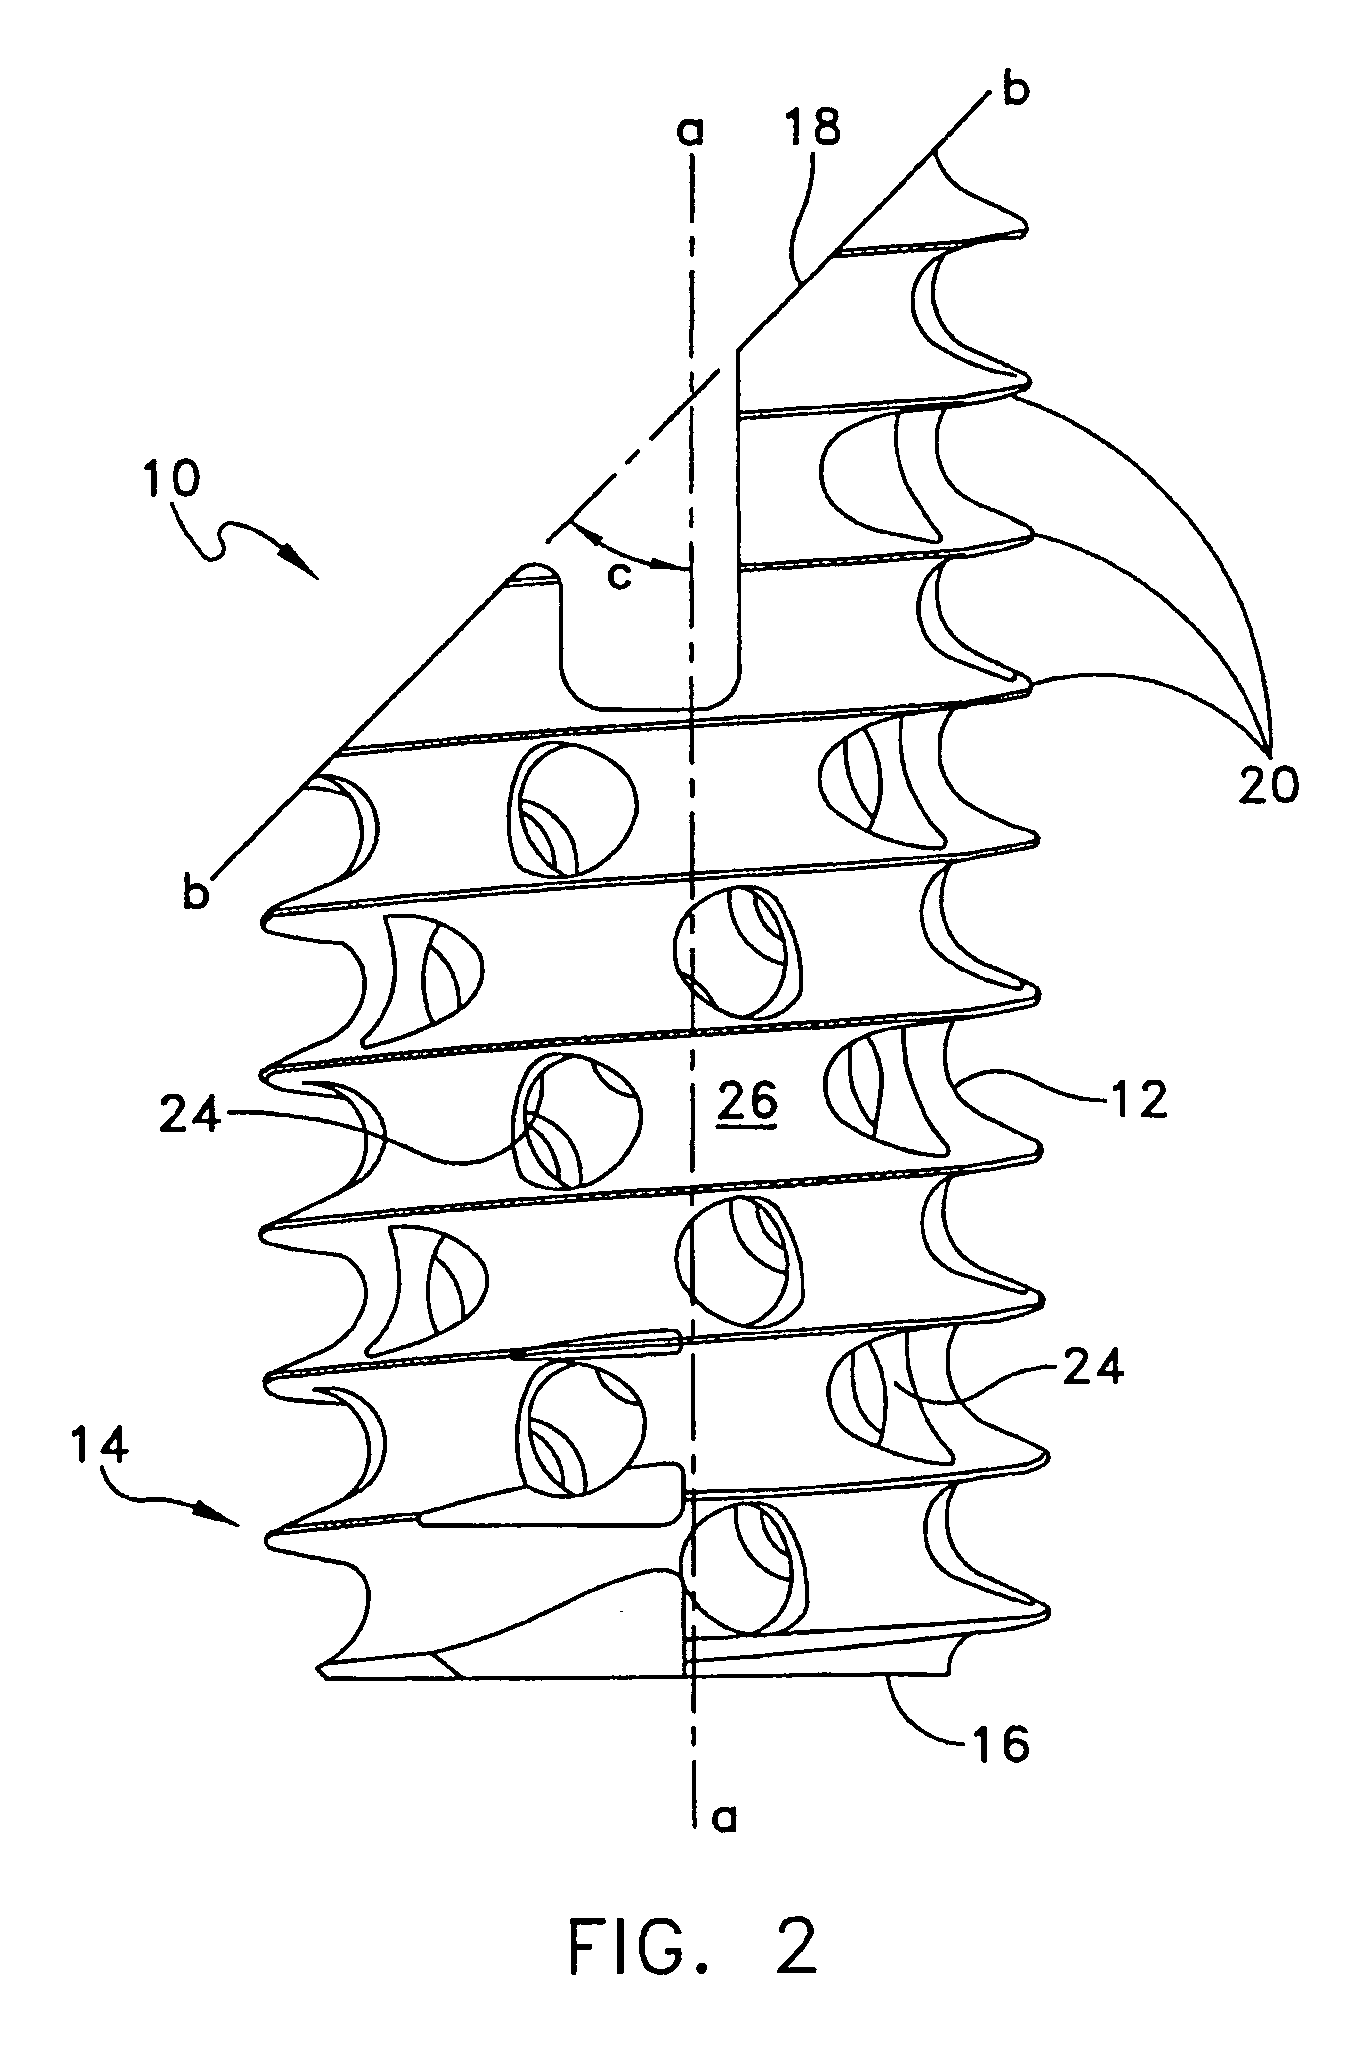 Fixation screw, graft ligament anchor assembly, and method for securing a graft ligament in a bone tunnel